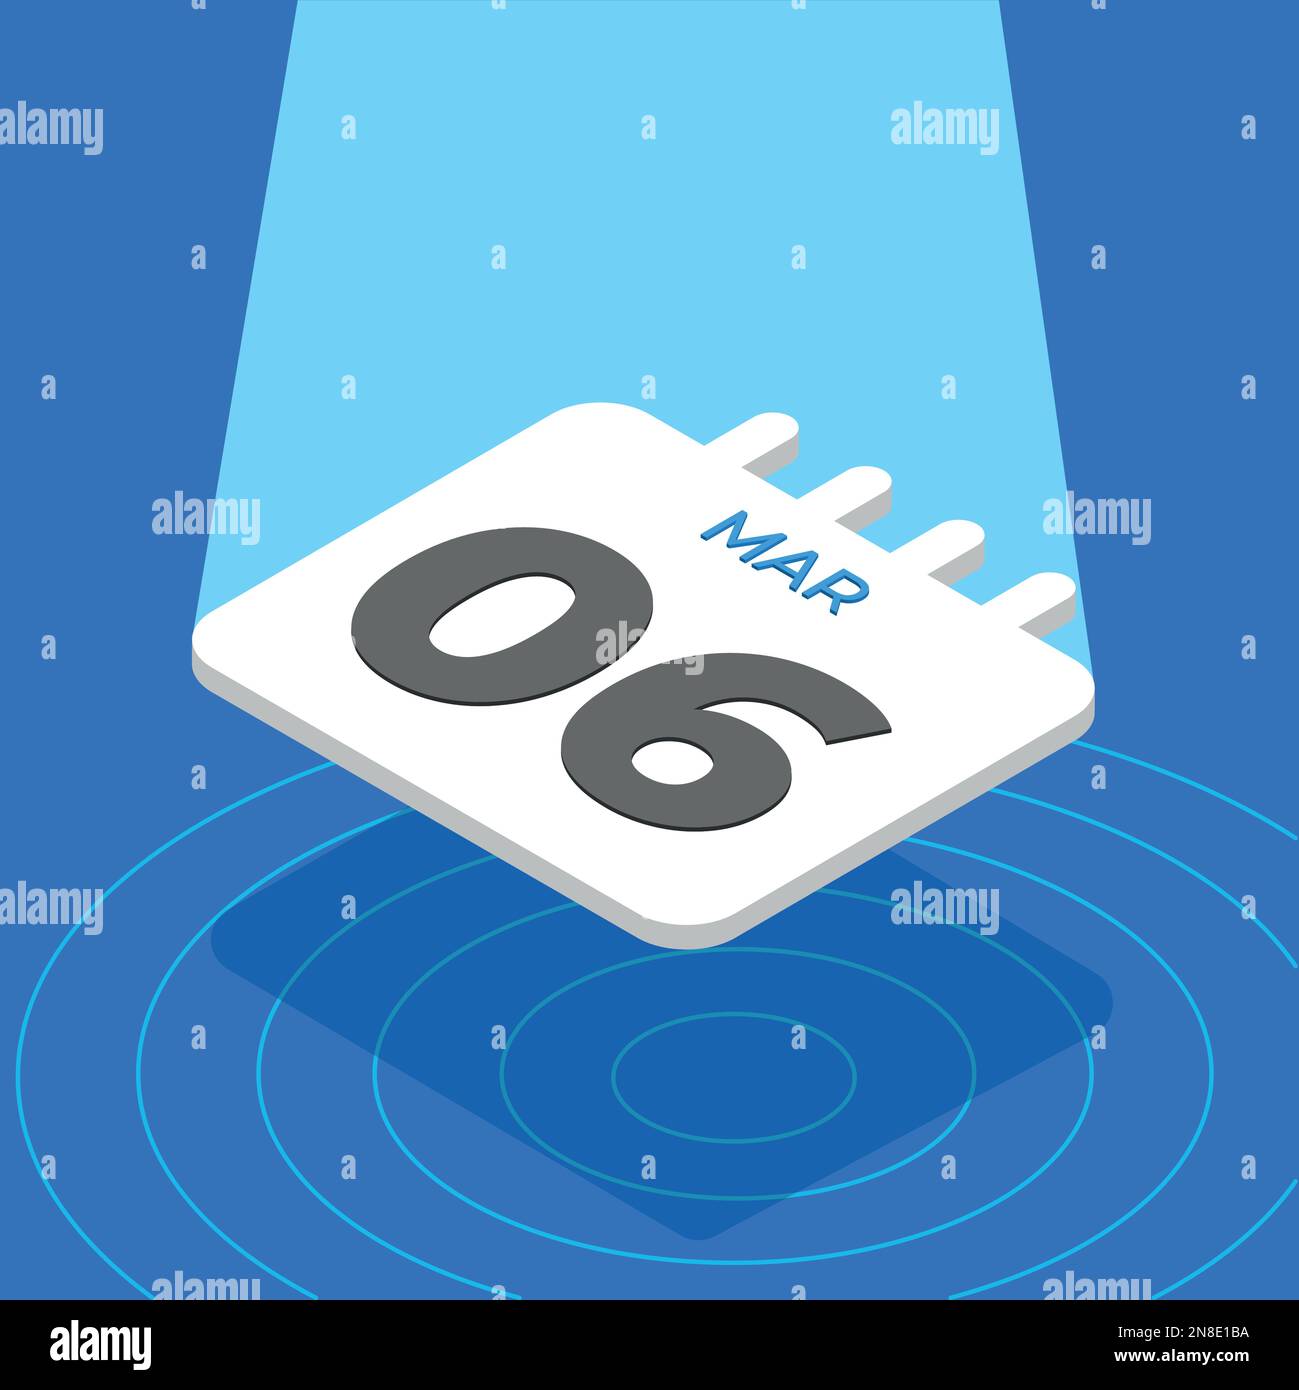 Day month year chinese calendar Banque d'images vectorielles - Page 3 -  Alamy